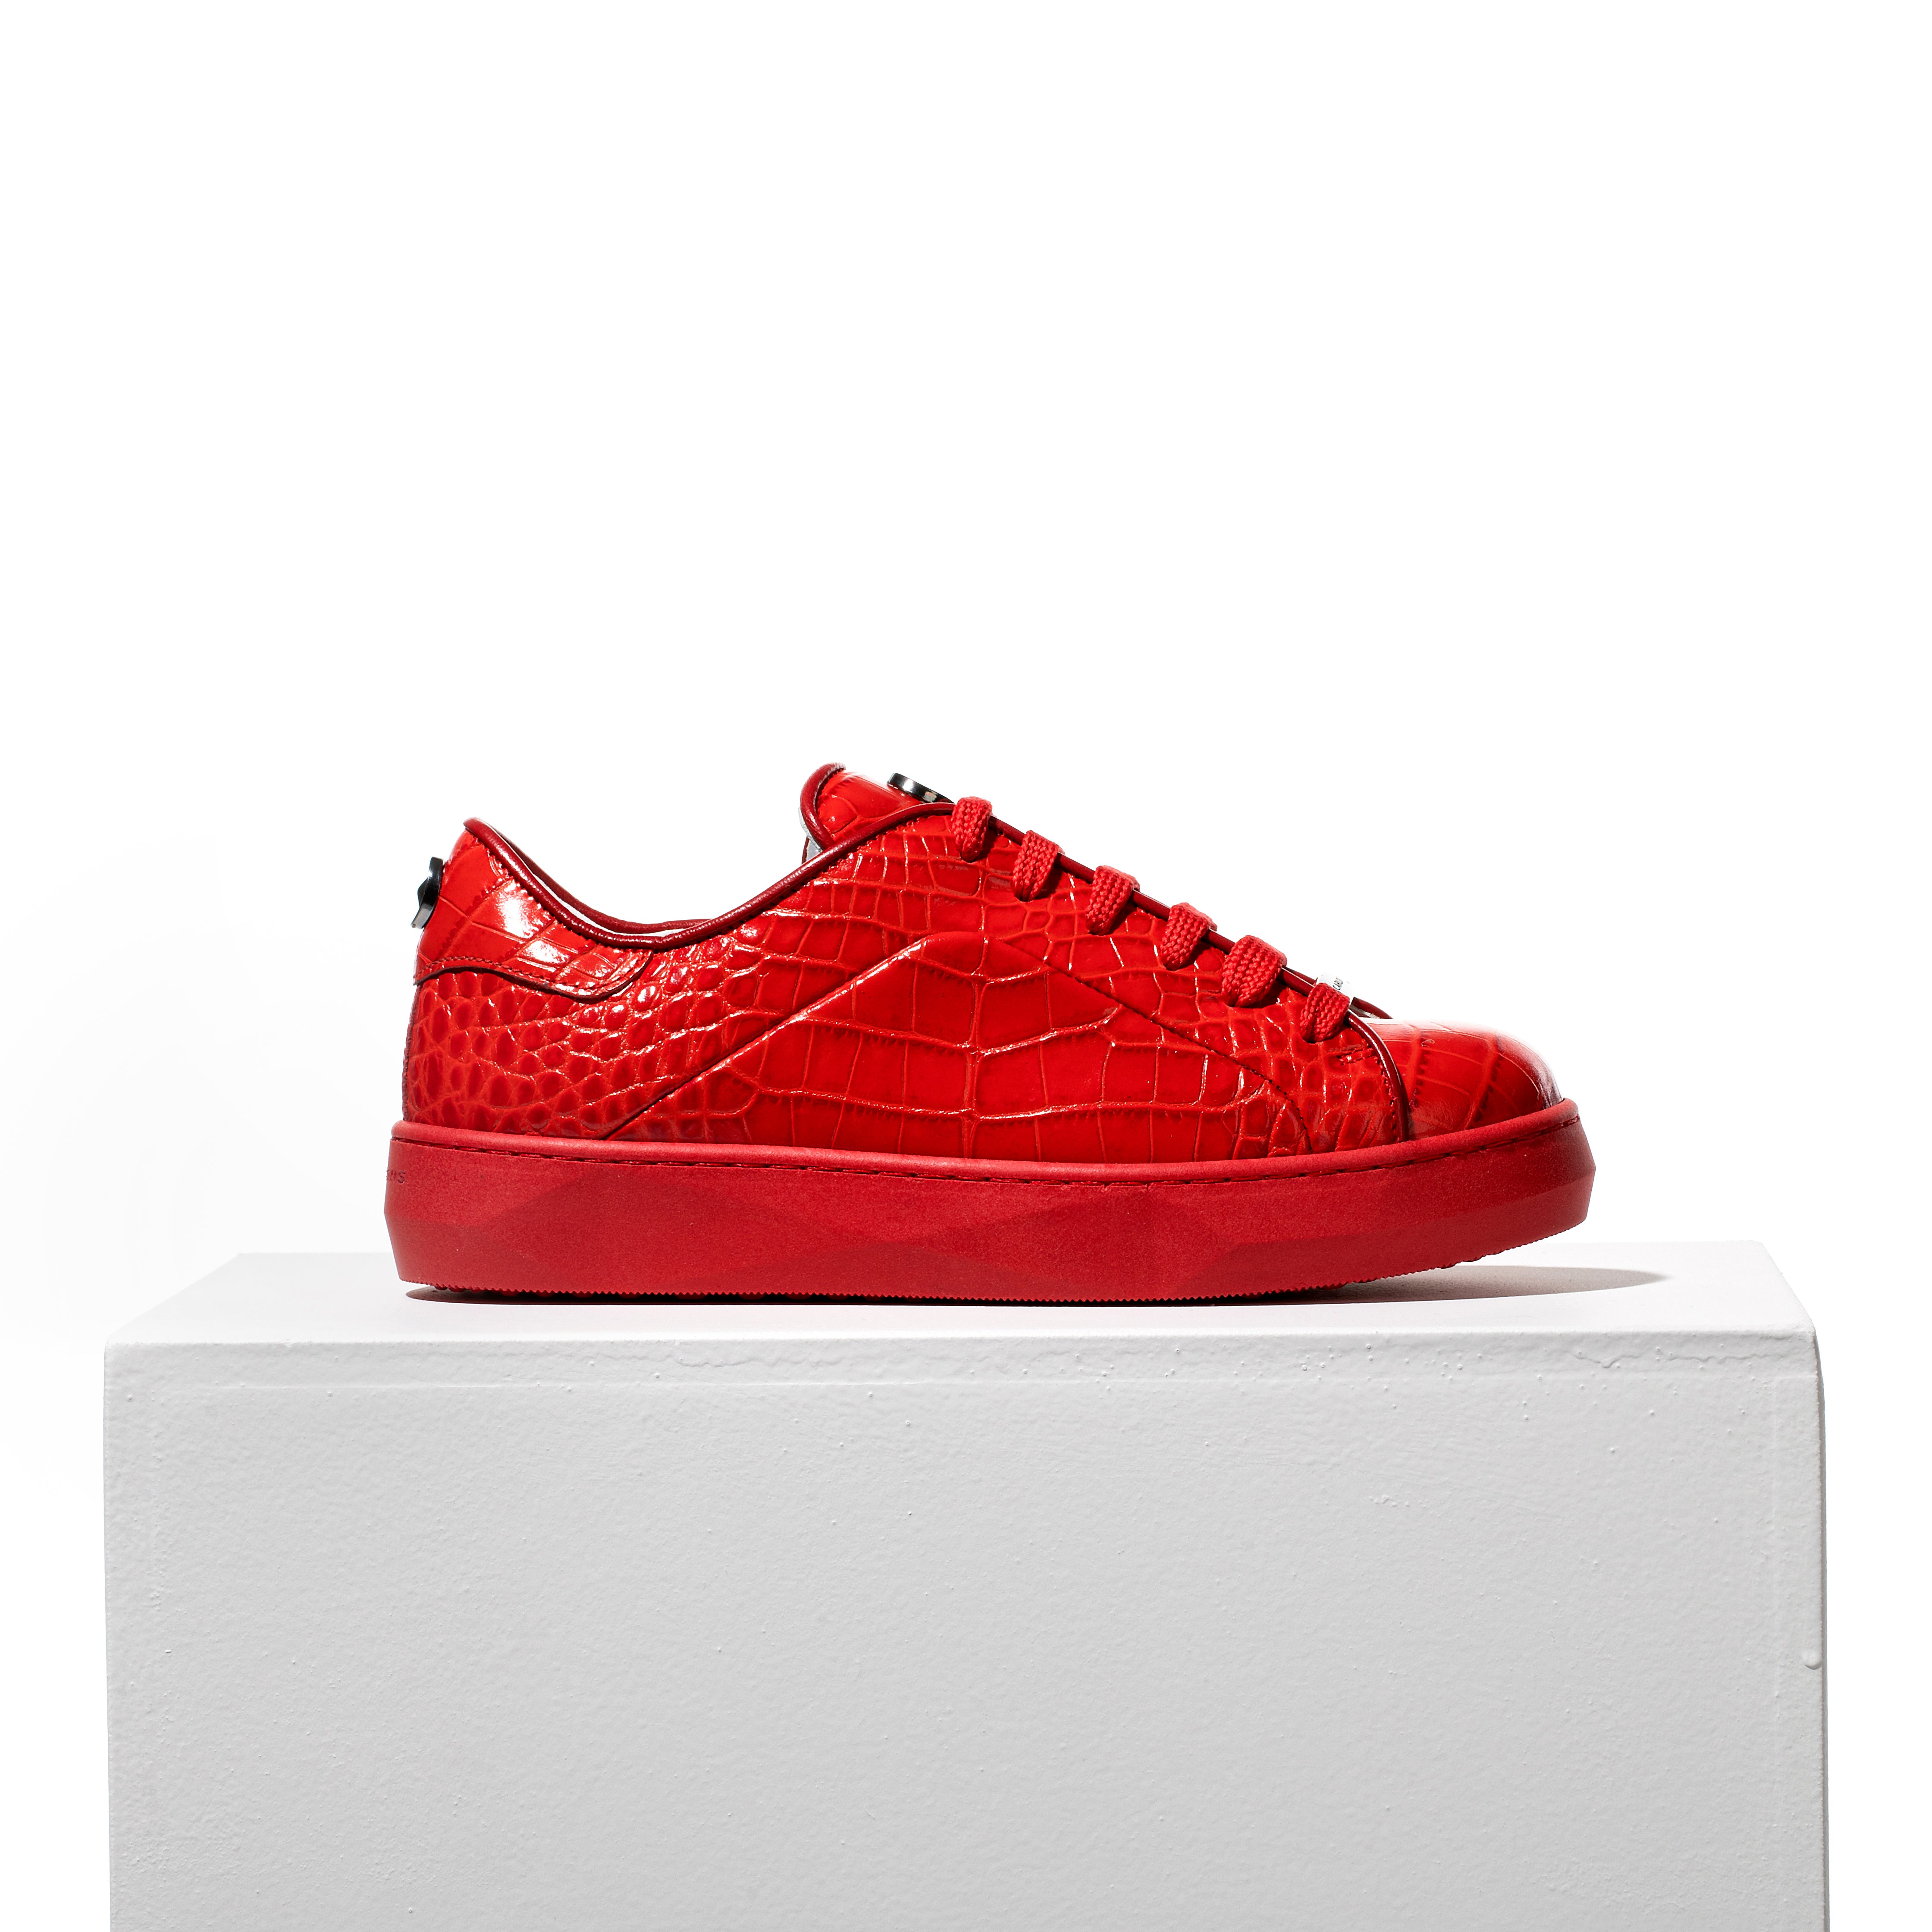 RED NACRE SNEAKERS